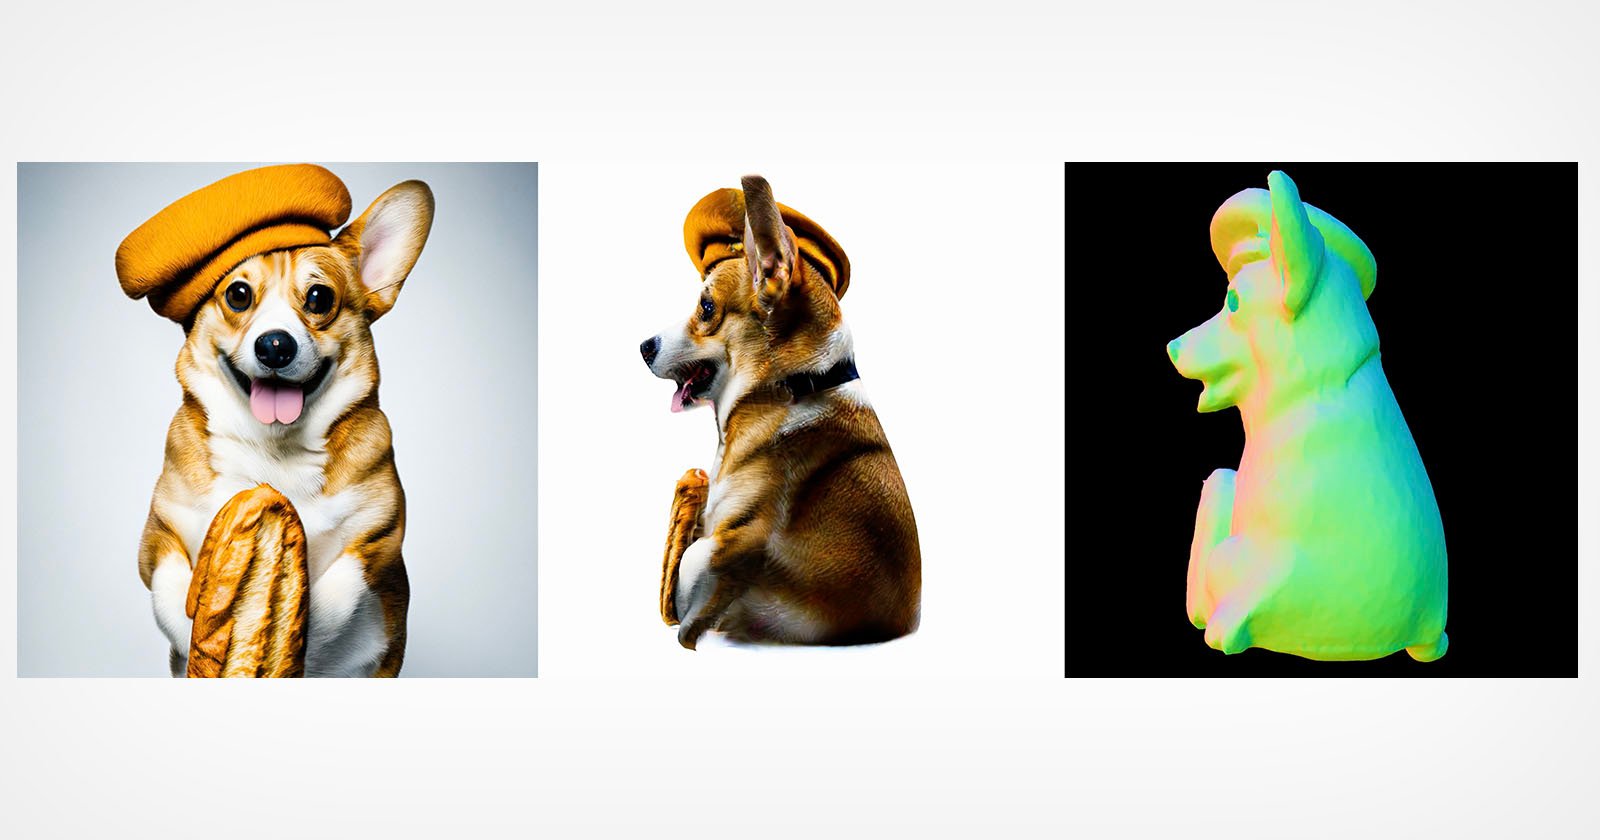 This AI Image Generator Transforms 2D Images Into 3D Images